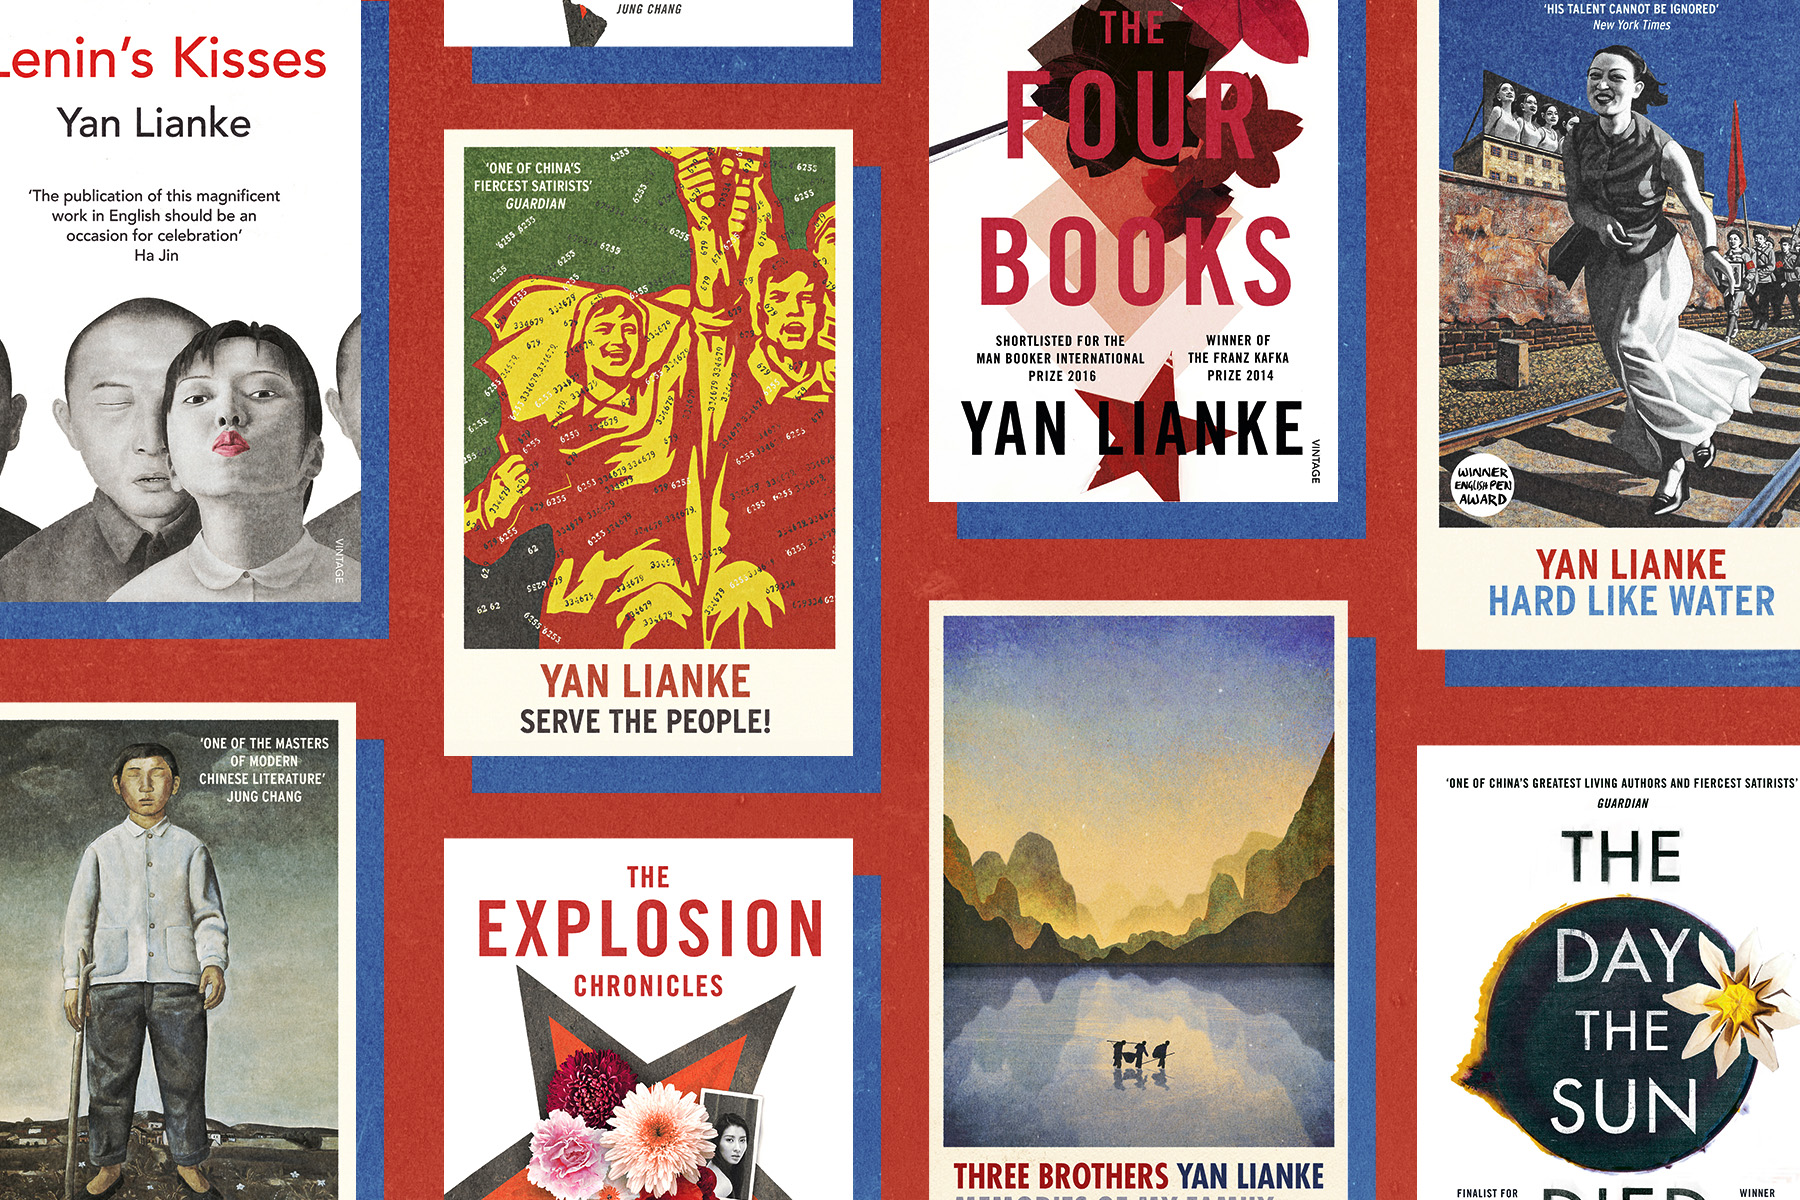 A flatlay of Yan Lianke book jackets on a red background.